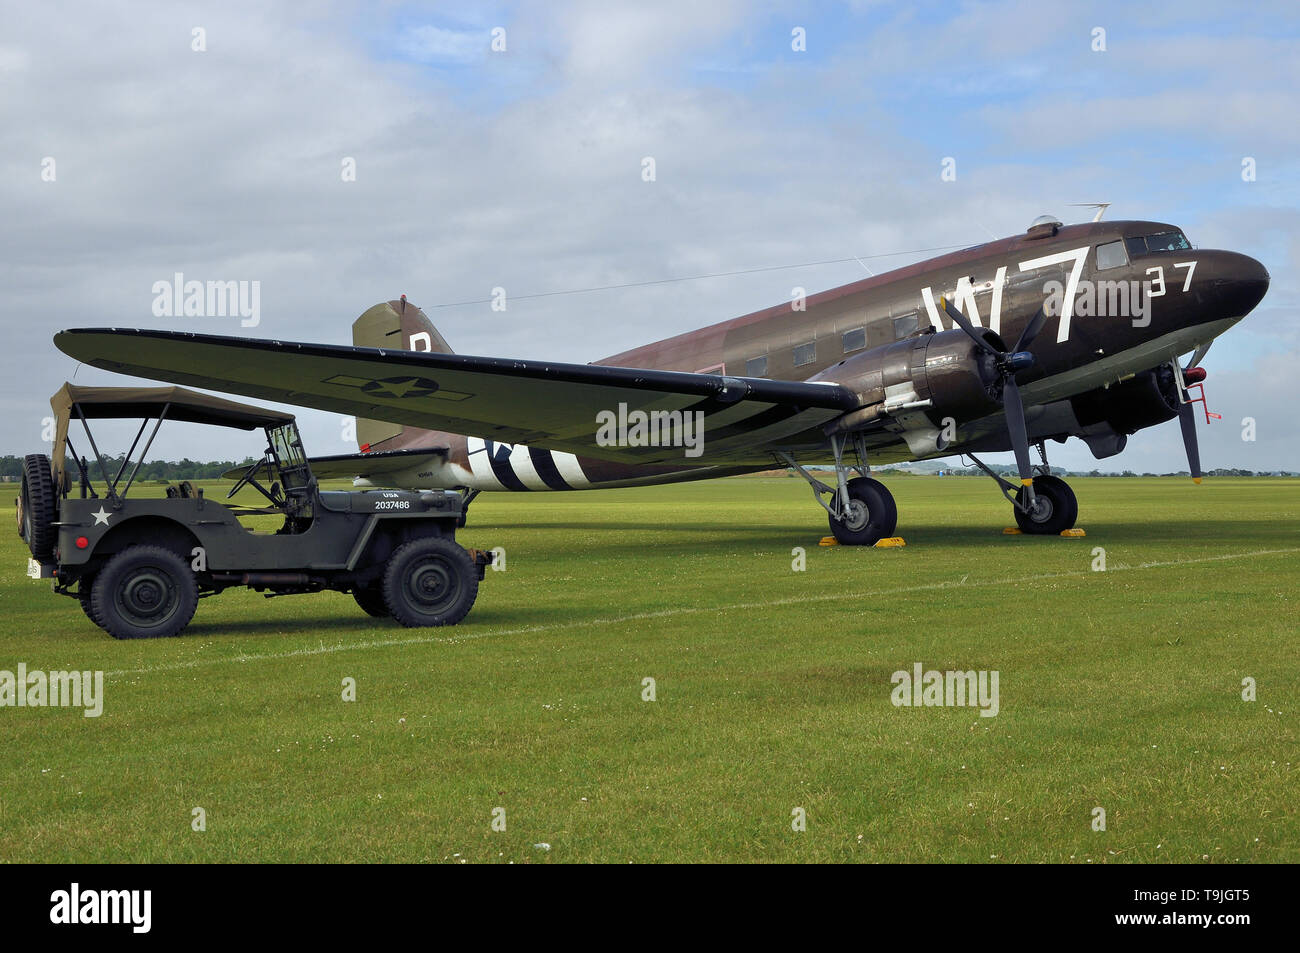 Douglas C-47 Skytrain transport plane in period camouflage markings - including D Day 'invasion stripes' - with Willys MB Jeep. Whiskey seven Stock Photo